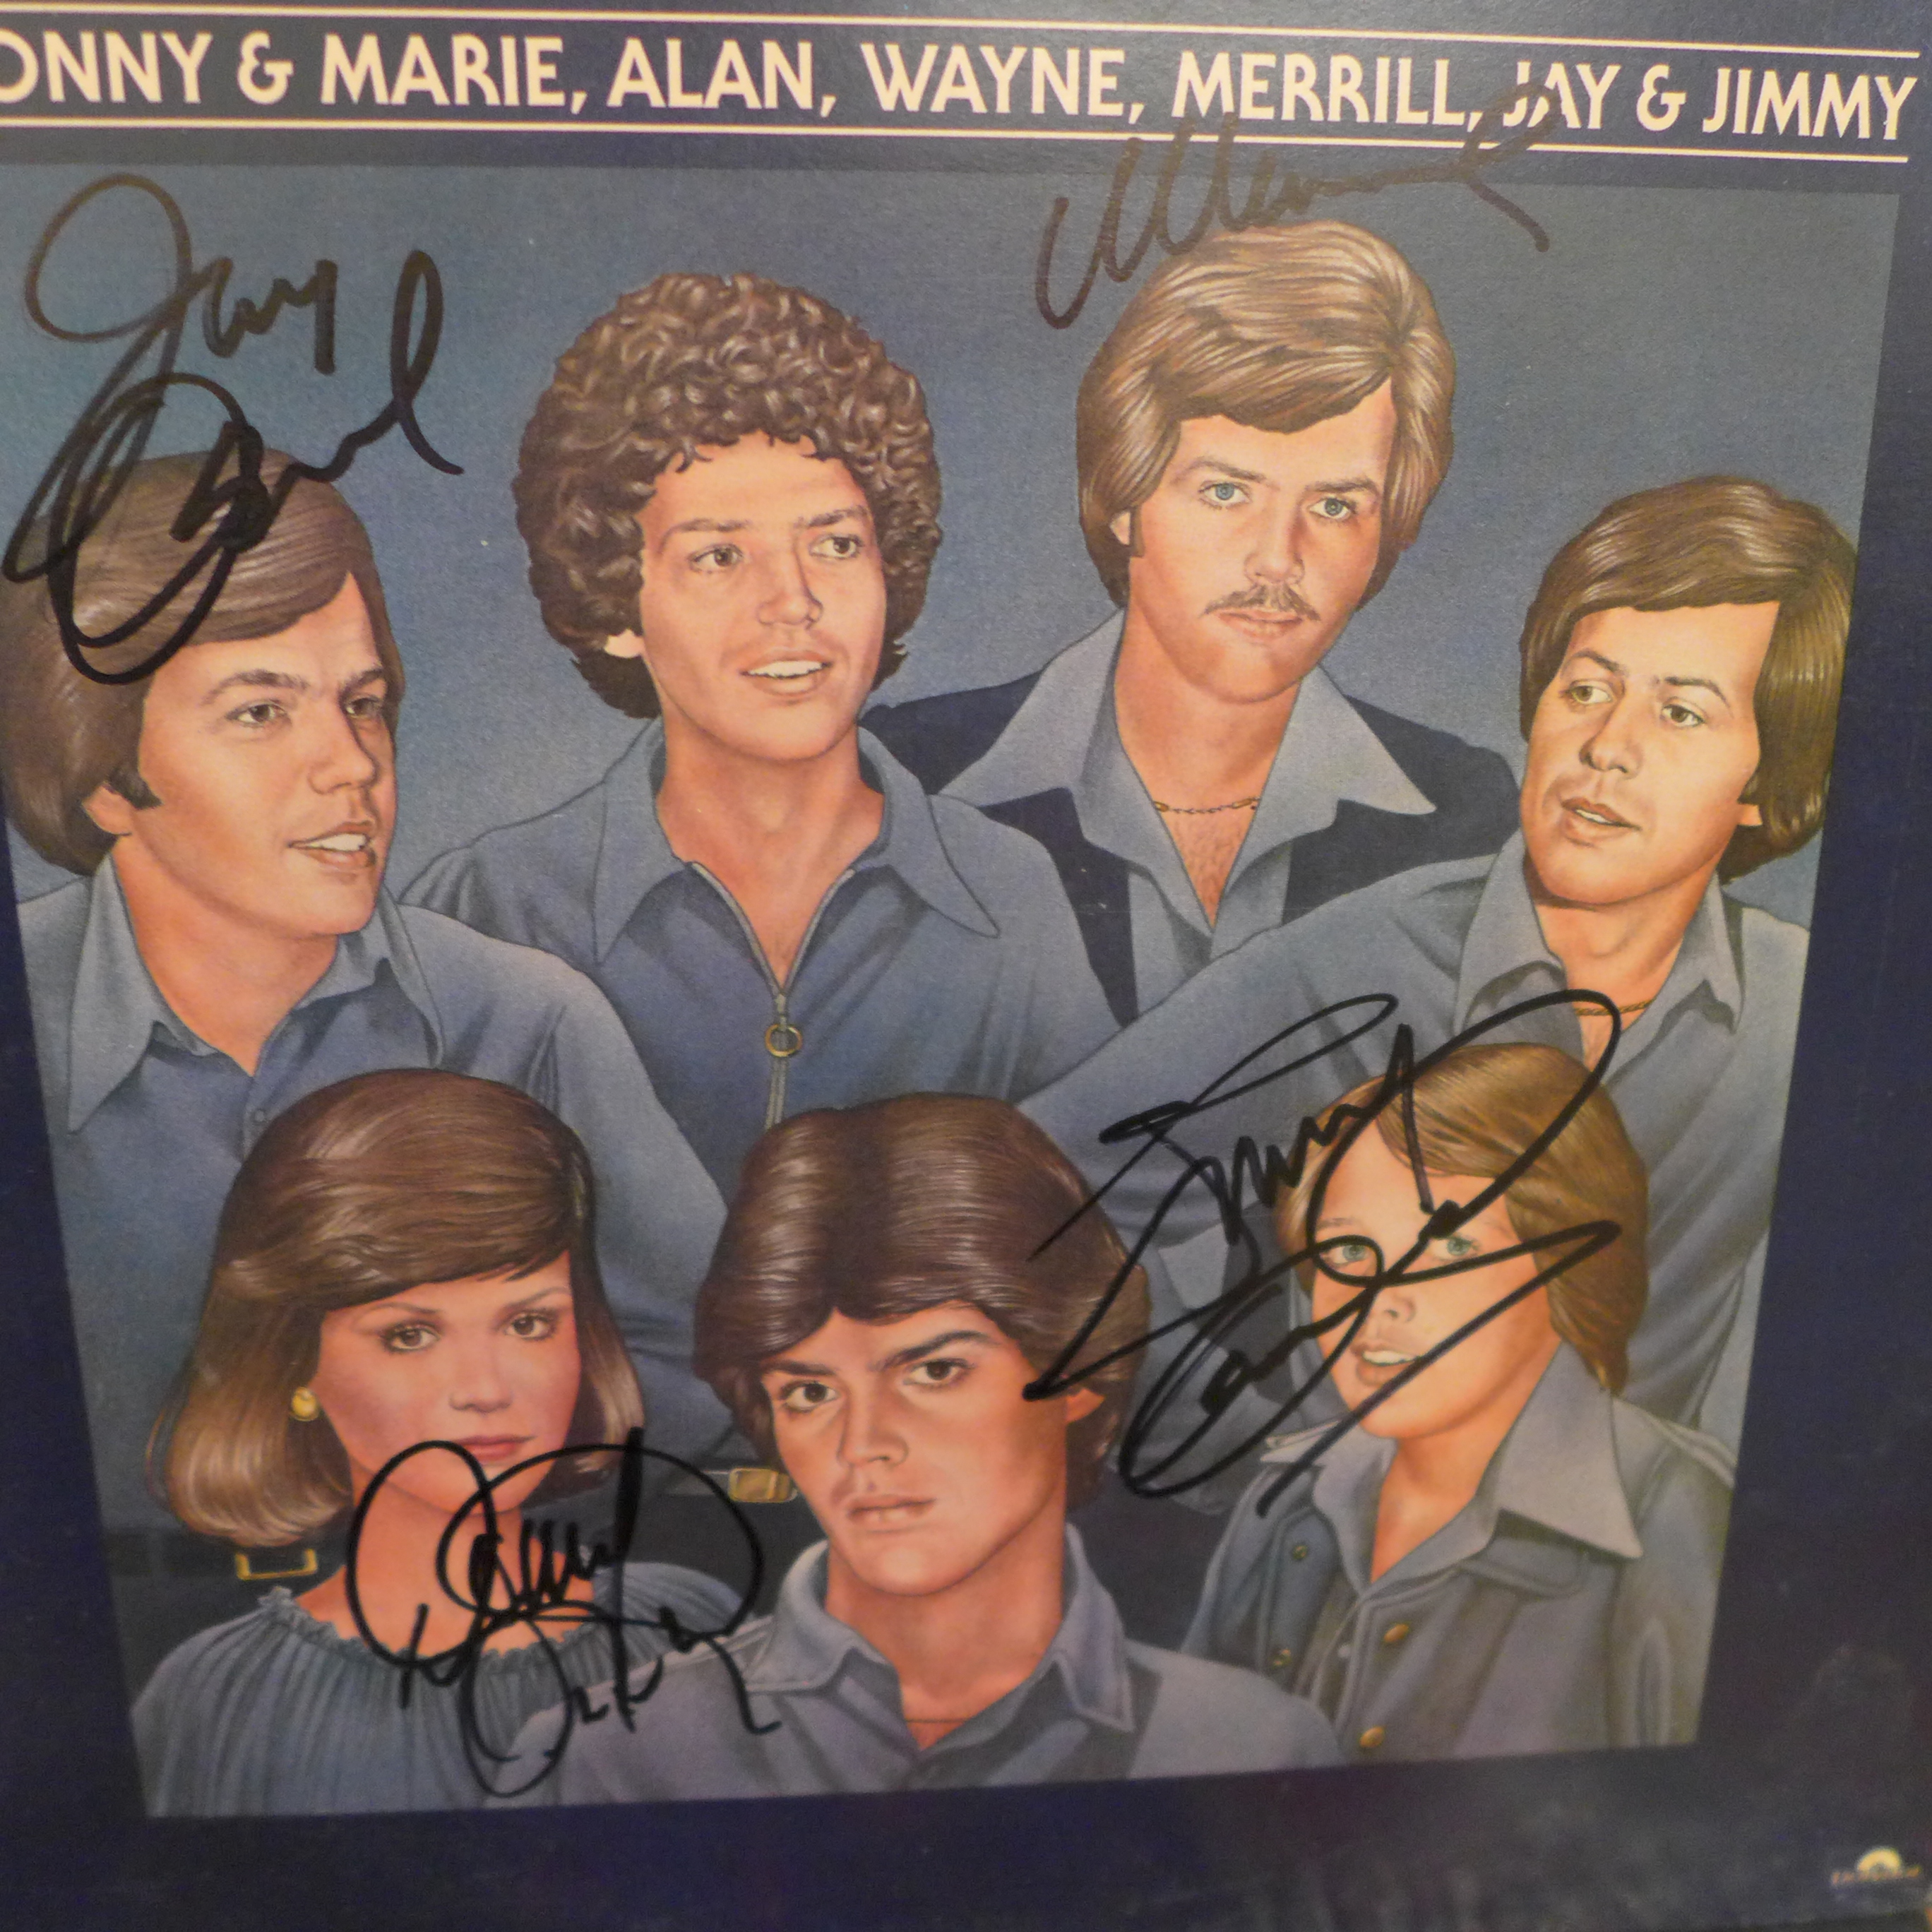 Two signed LP records, Toyah and The Osmonds - Image 3 of 3